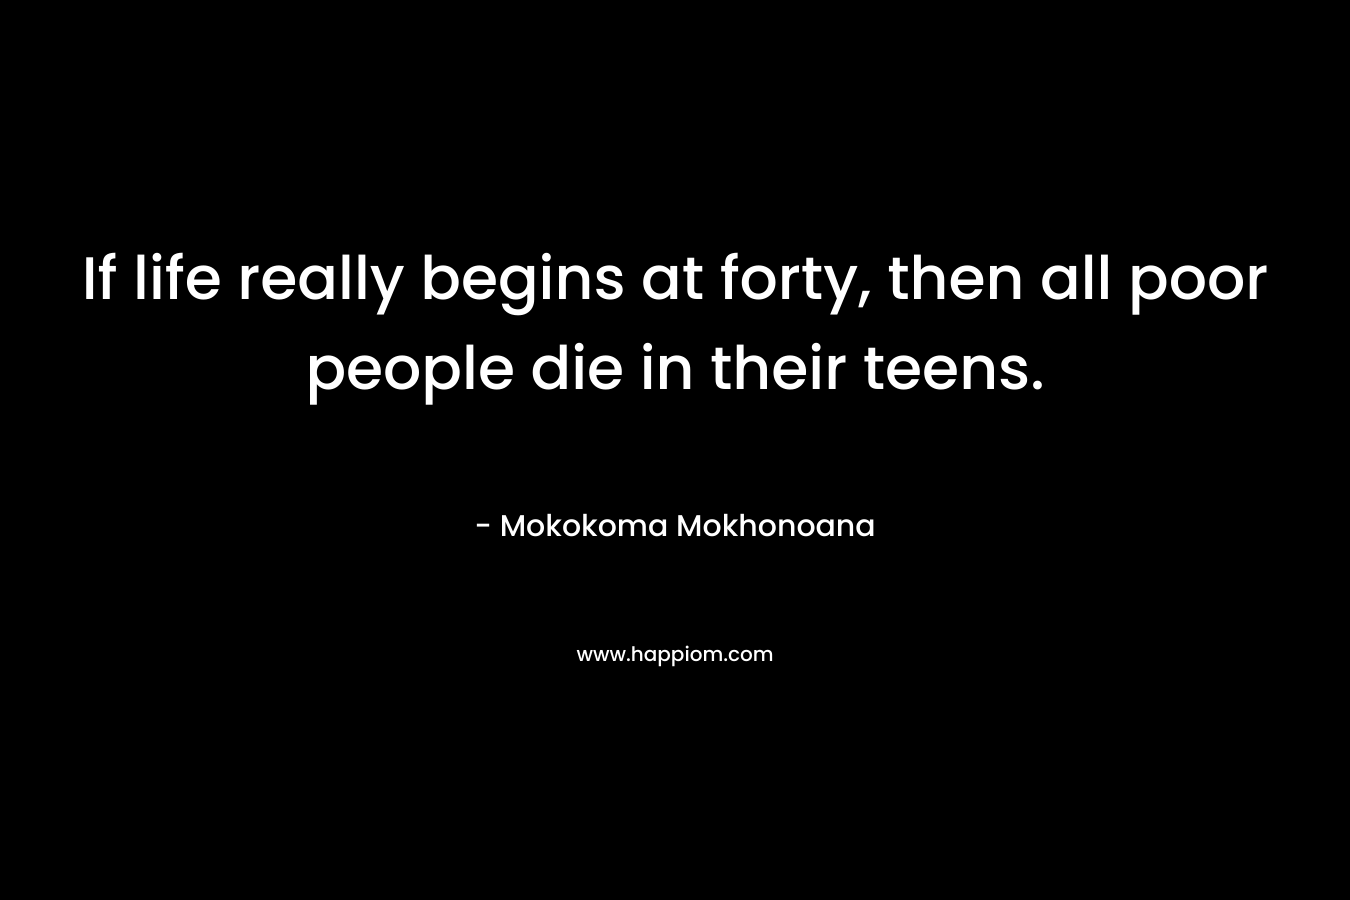 If life really begins at forty, then all poor people die in their teens. – Mokokoma Mokhonoana